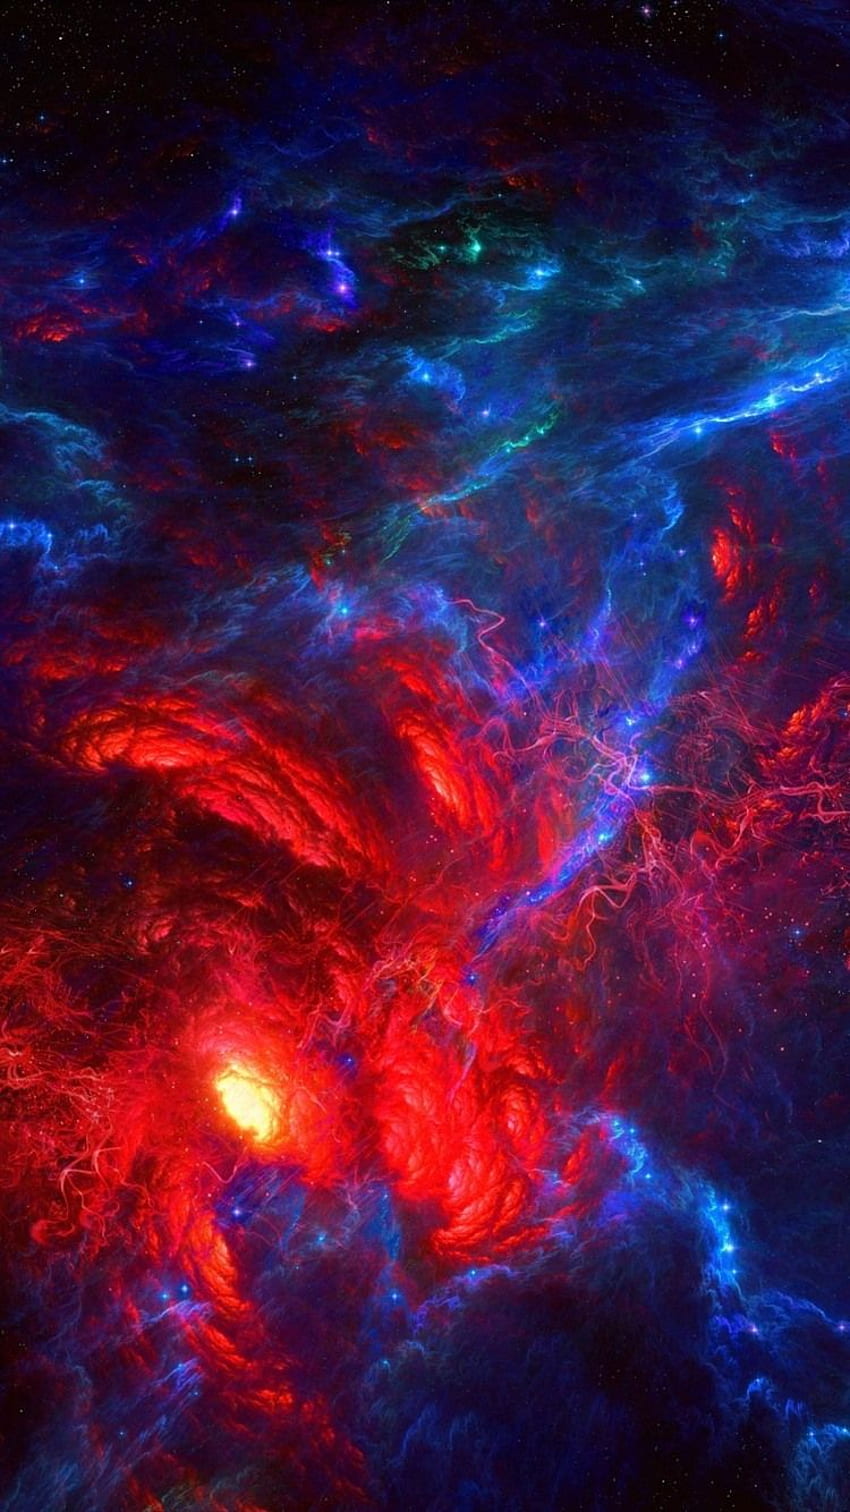 Glistening Stars With Dirty Red And Purple Clouds HD Galaxy Wallpapers  HD  Wallpapers  ID 49766